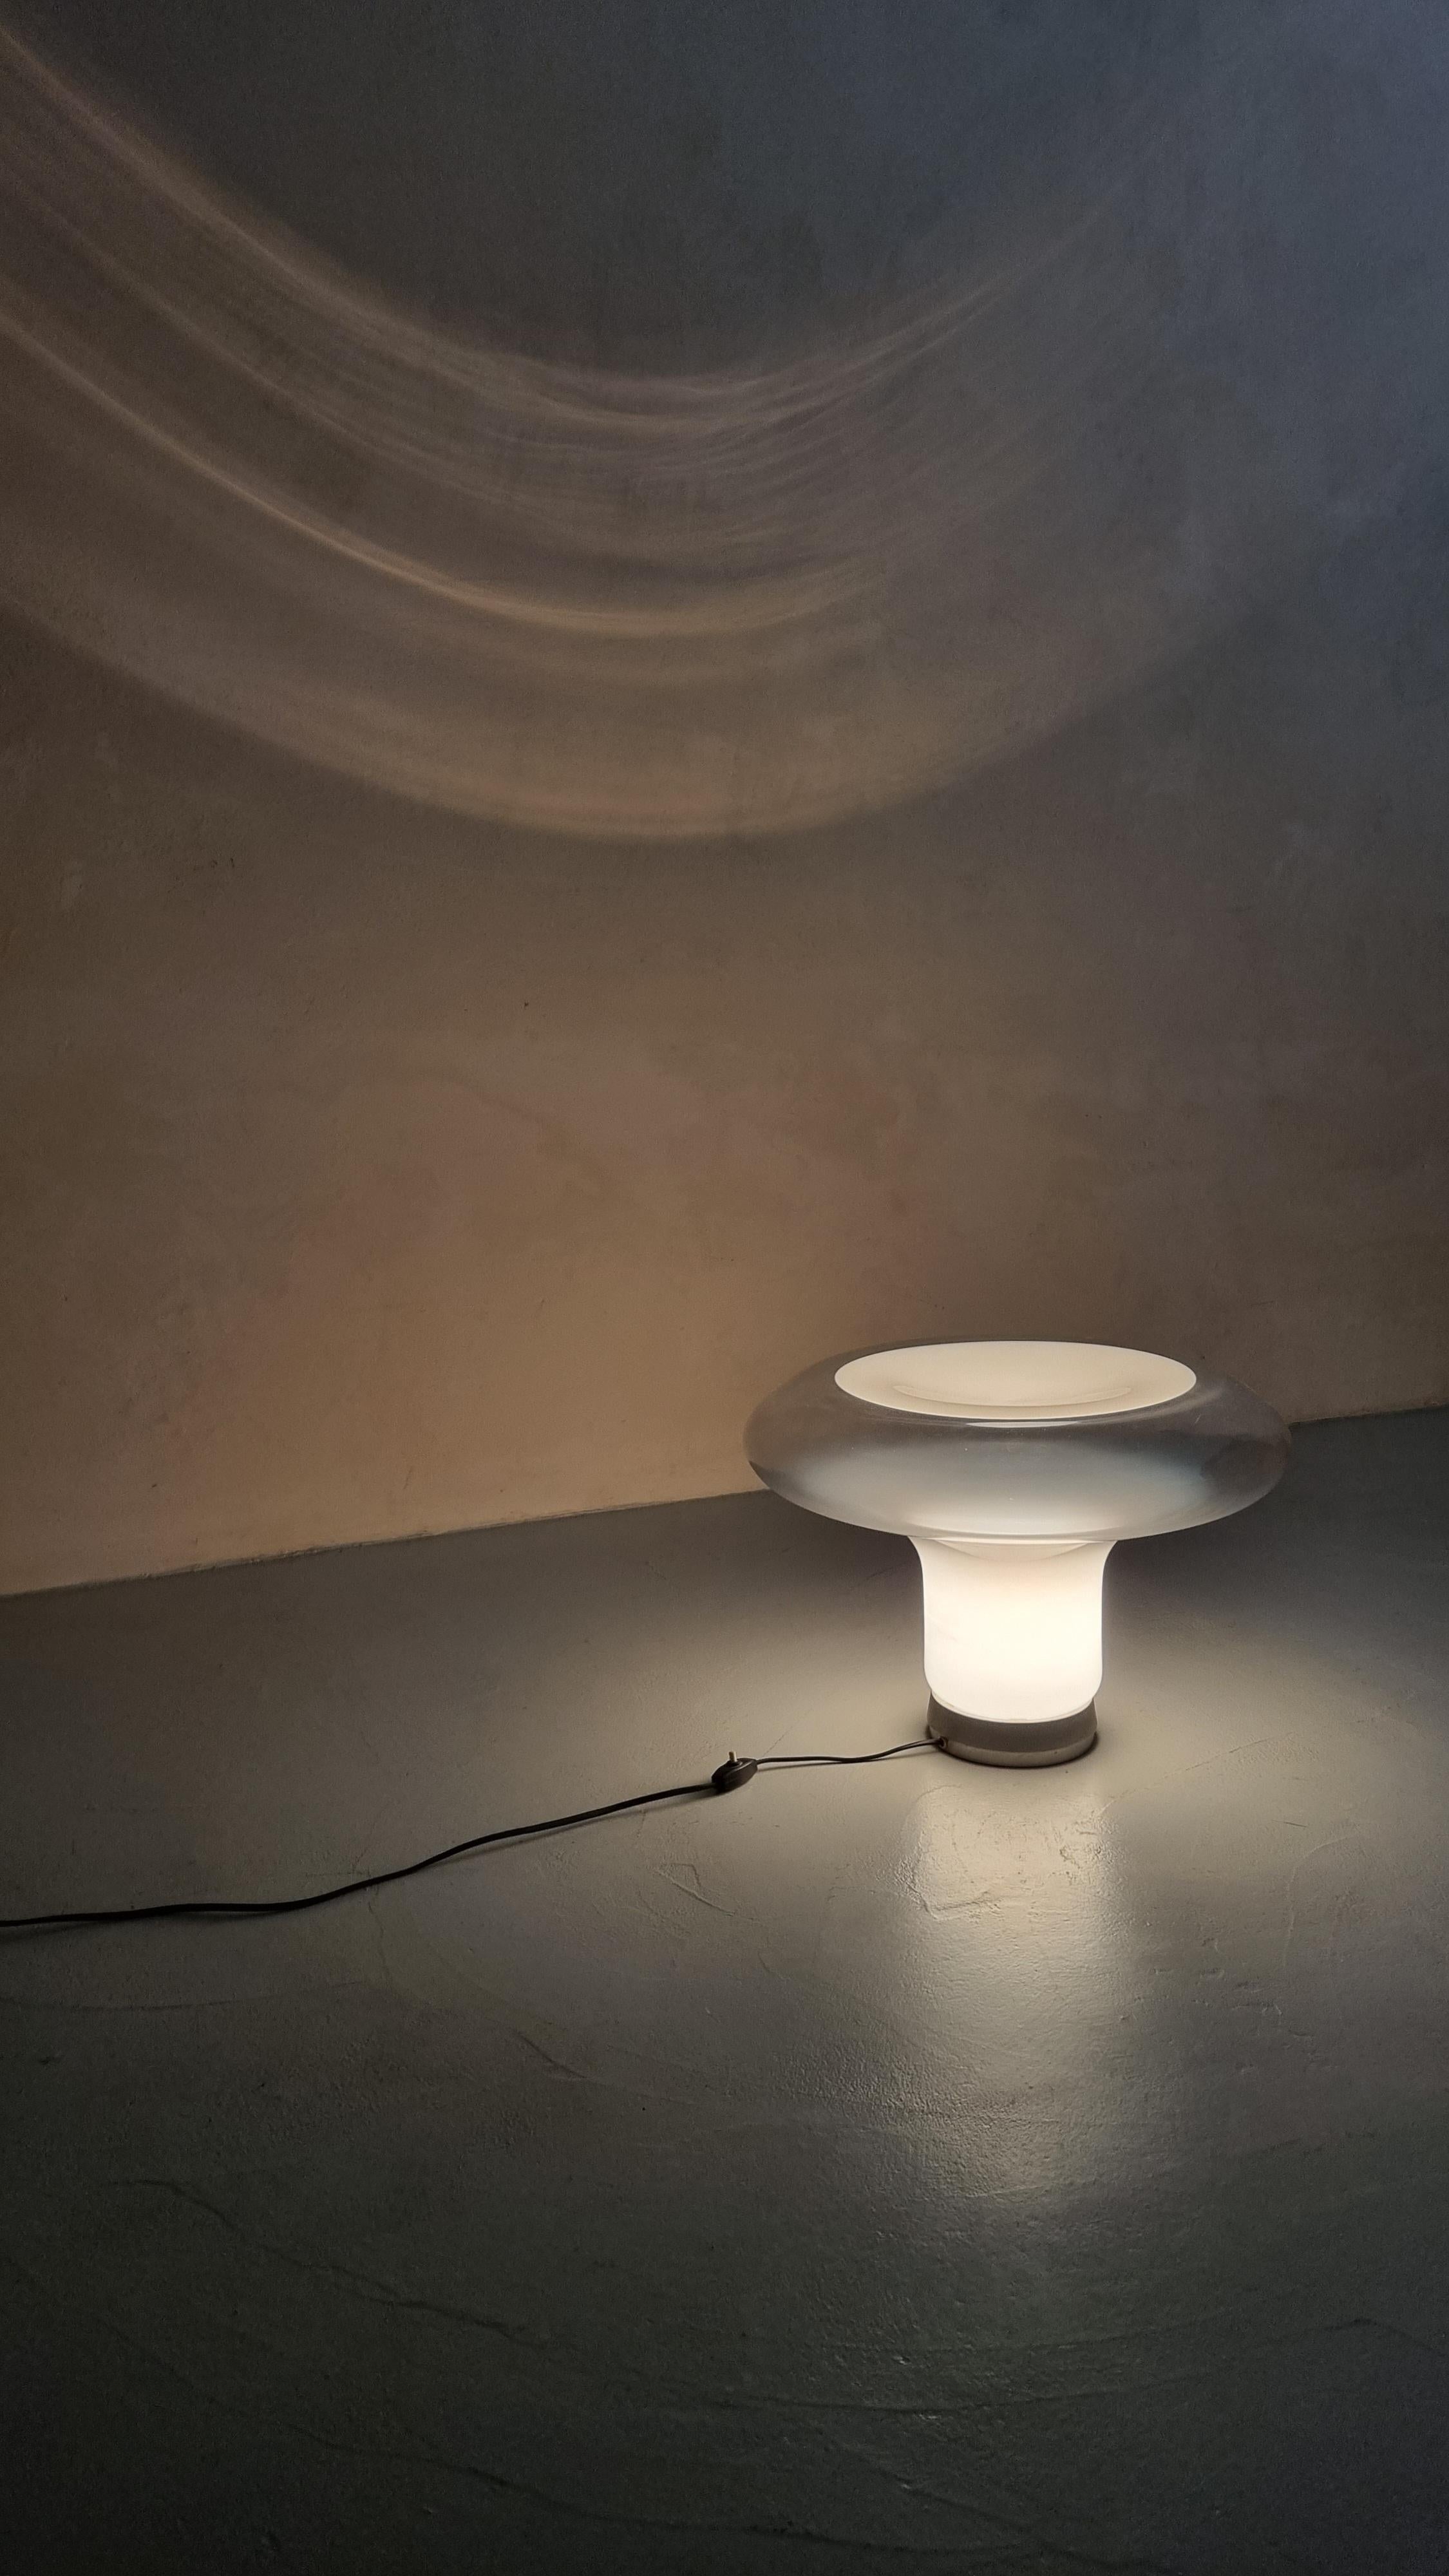 Lesbo table lamp by Angelo Mangiarotti for Artemide 1967 1st production In Excellent Condition For Sale In Arezzo, Italy